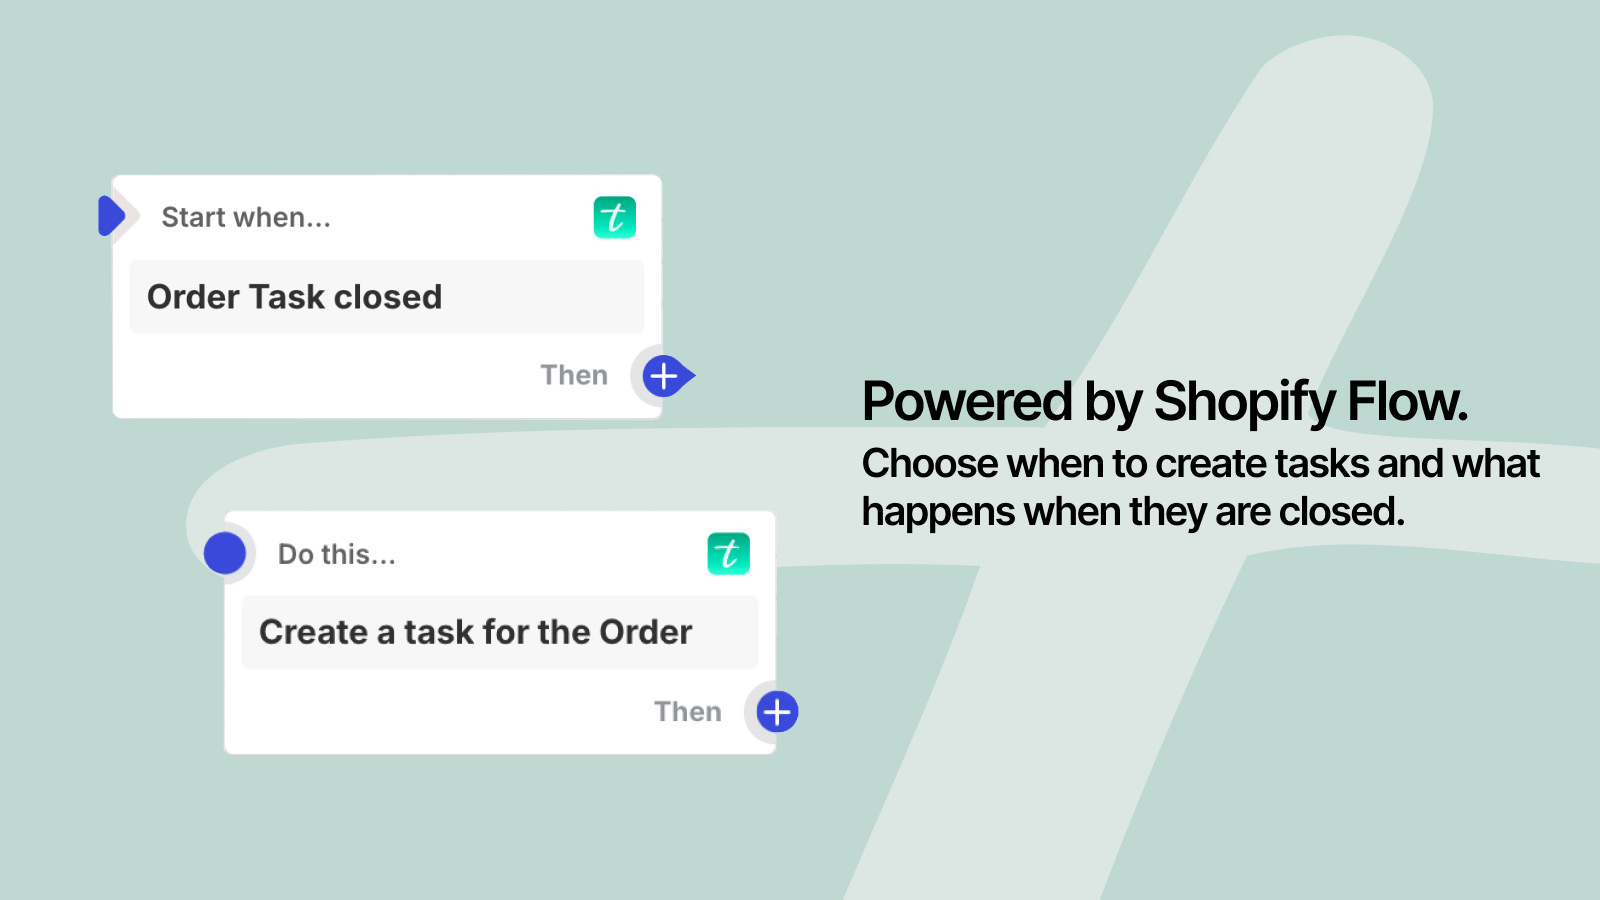 Create tasks with our Shopify Flow triggers and actions